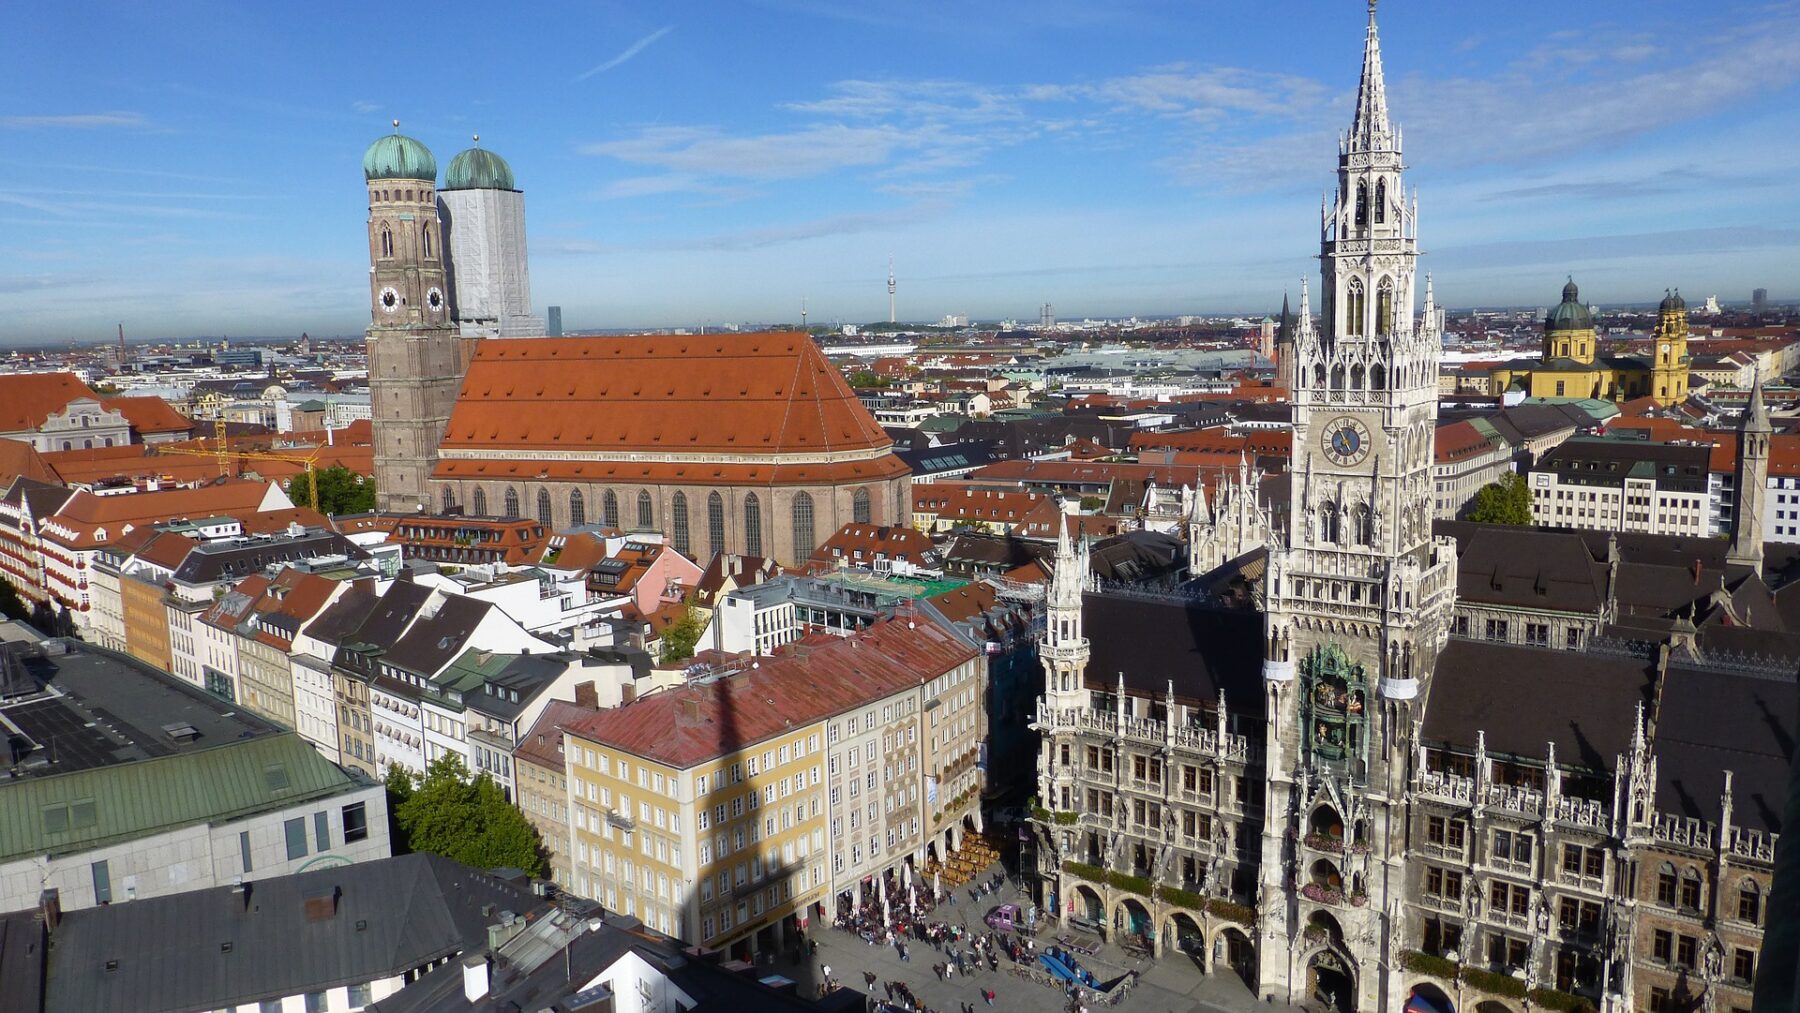 Munich from above. Image source: Pixabay user flyupmike.